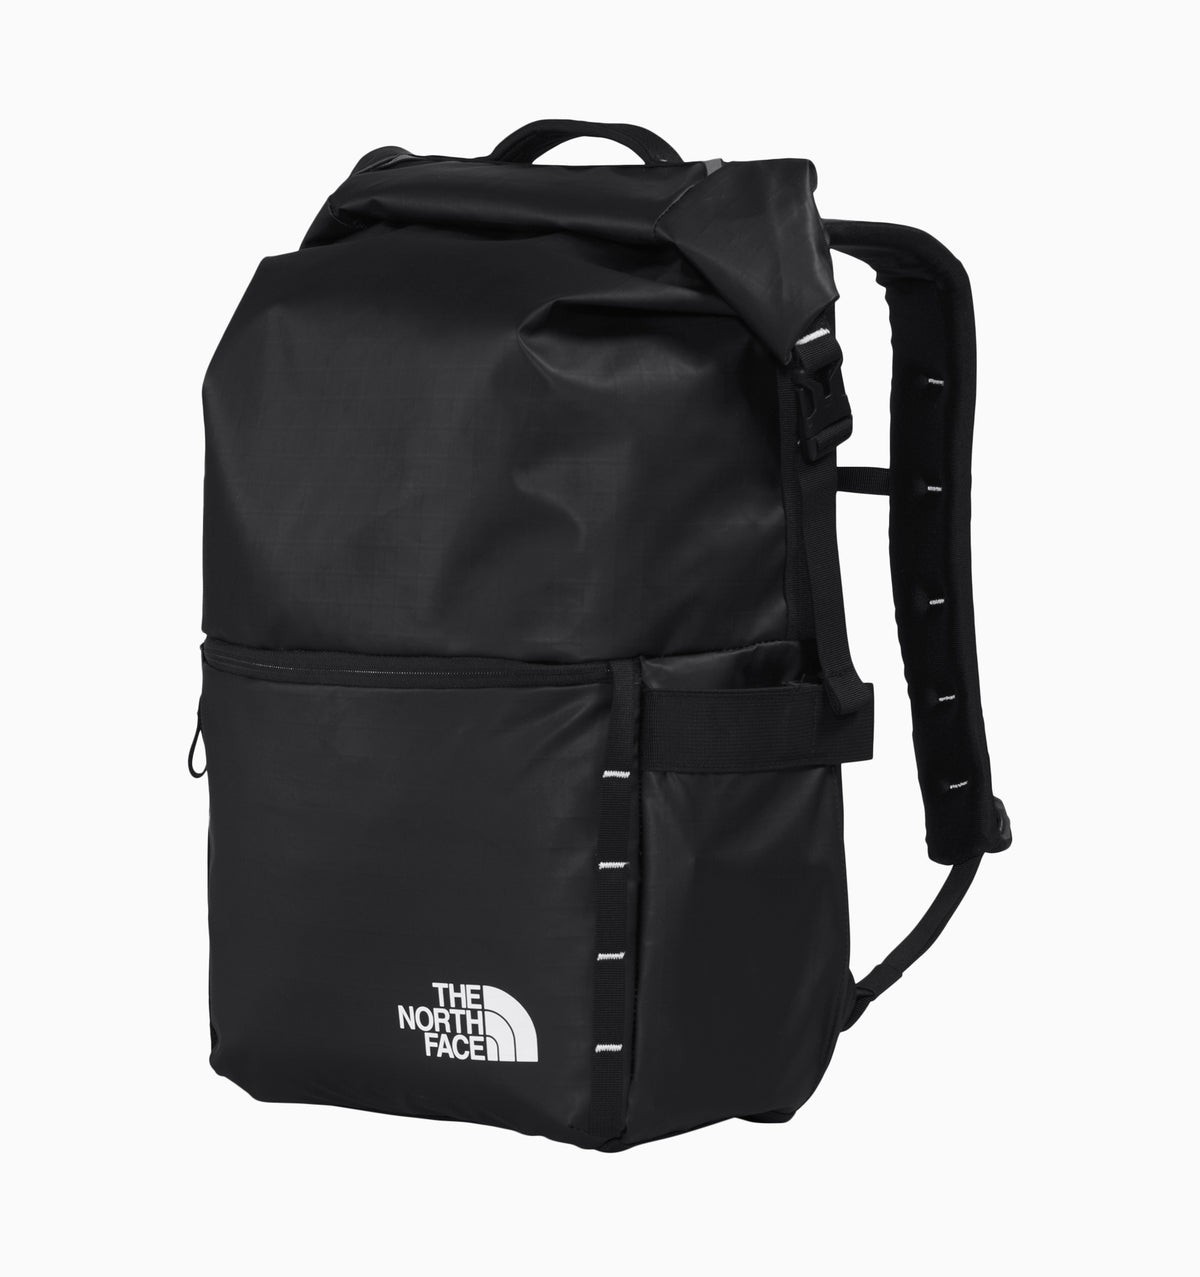 The North Face 16" Base Camp Voyager Roll Top Backpack 25L - Black